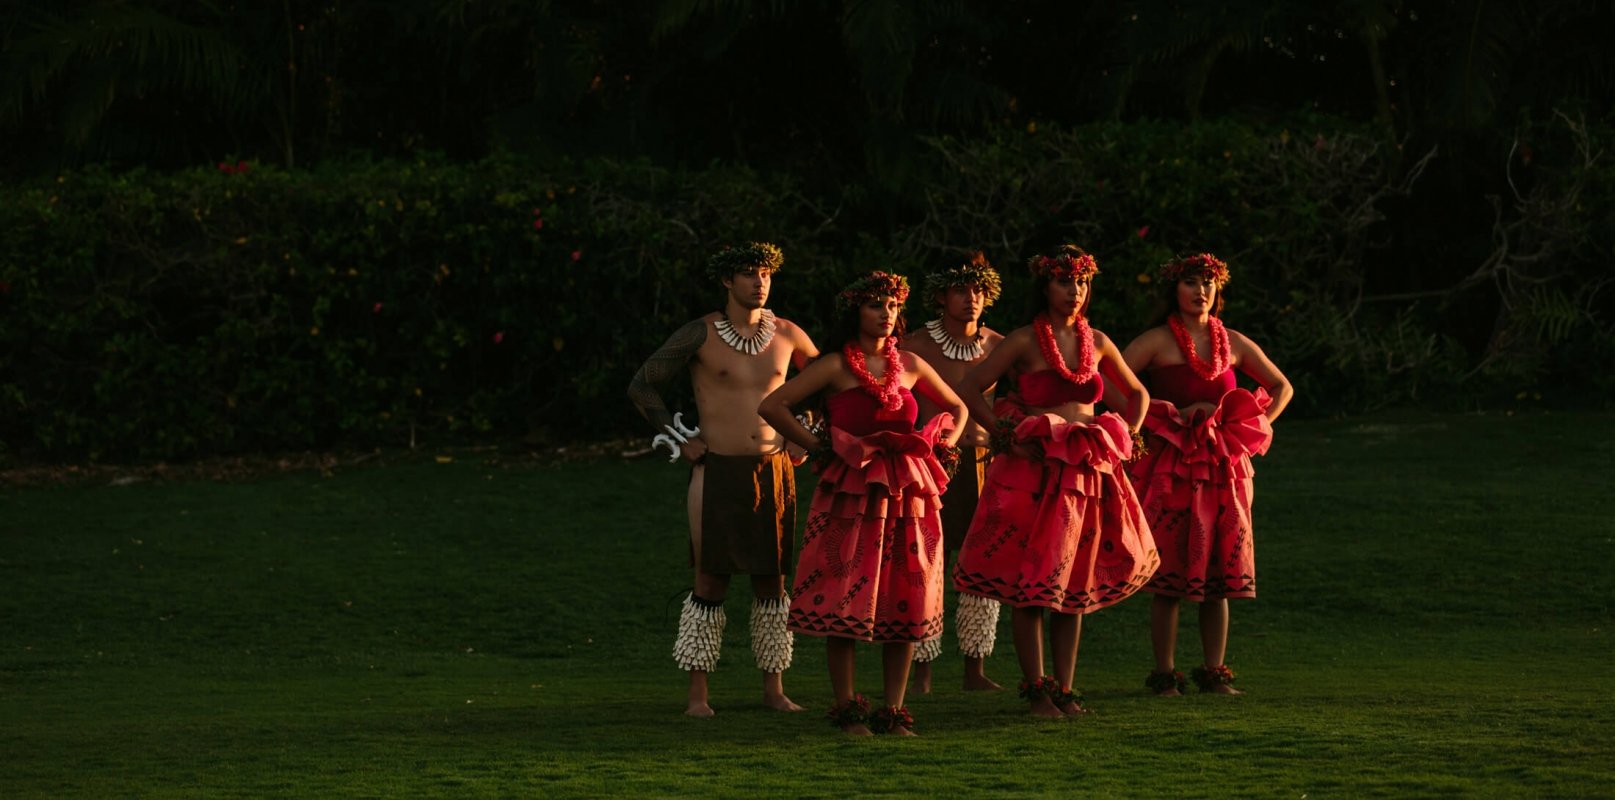 a group of women in red and men dance in a field